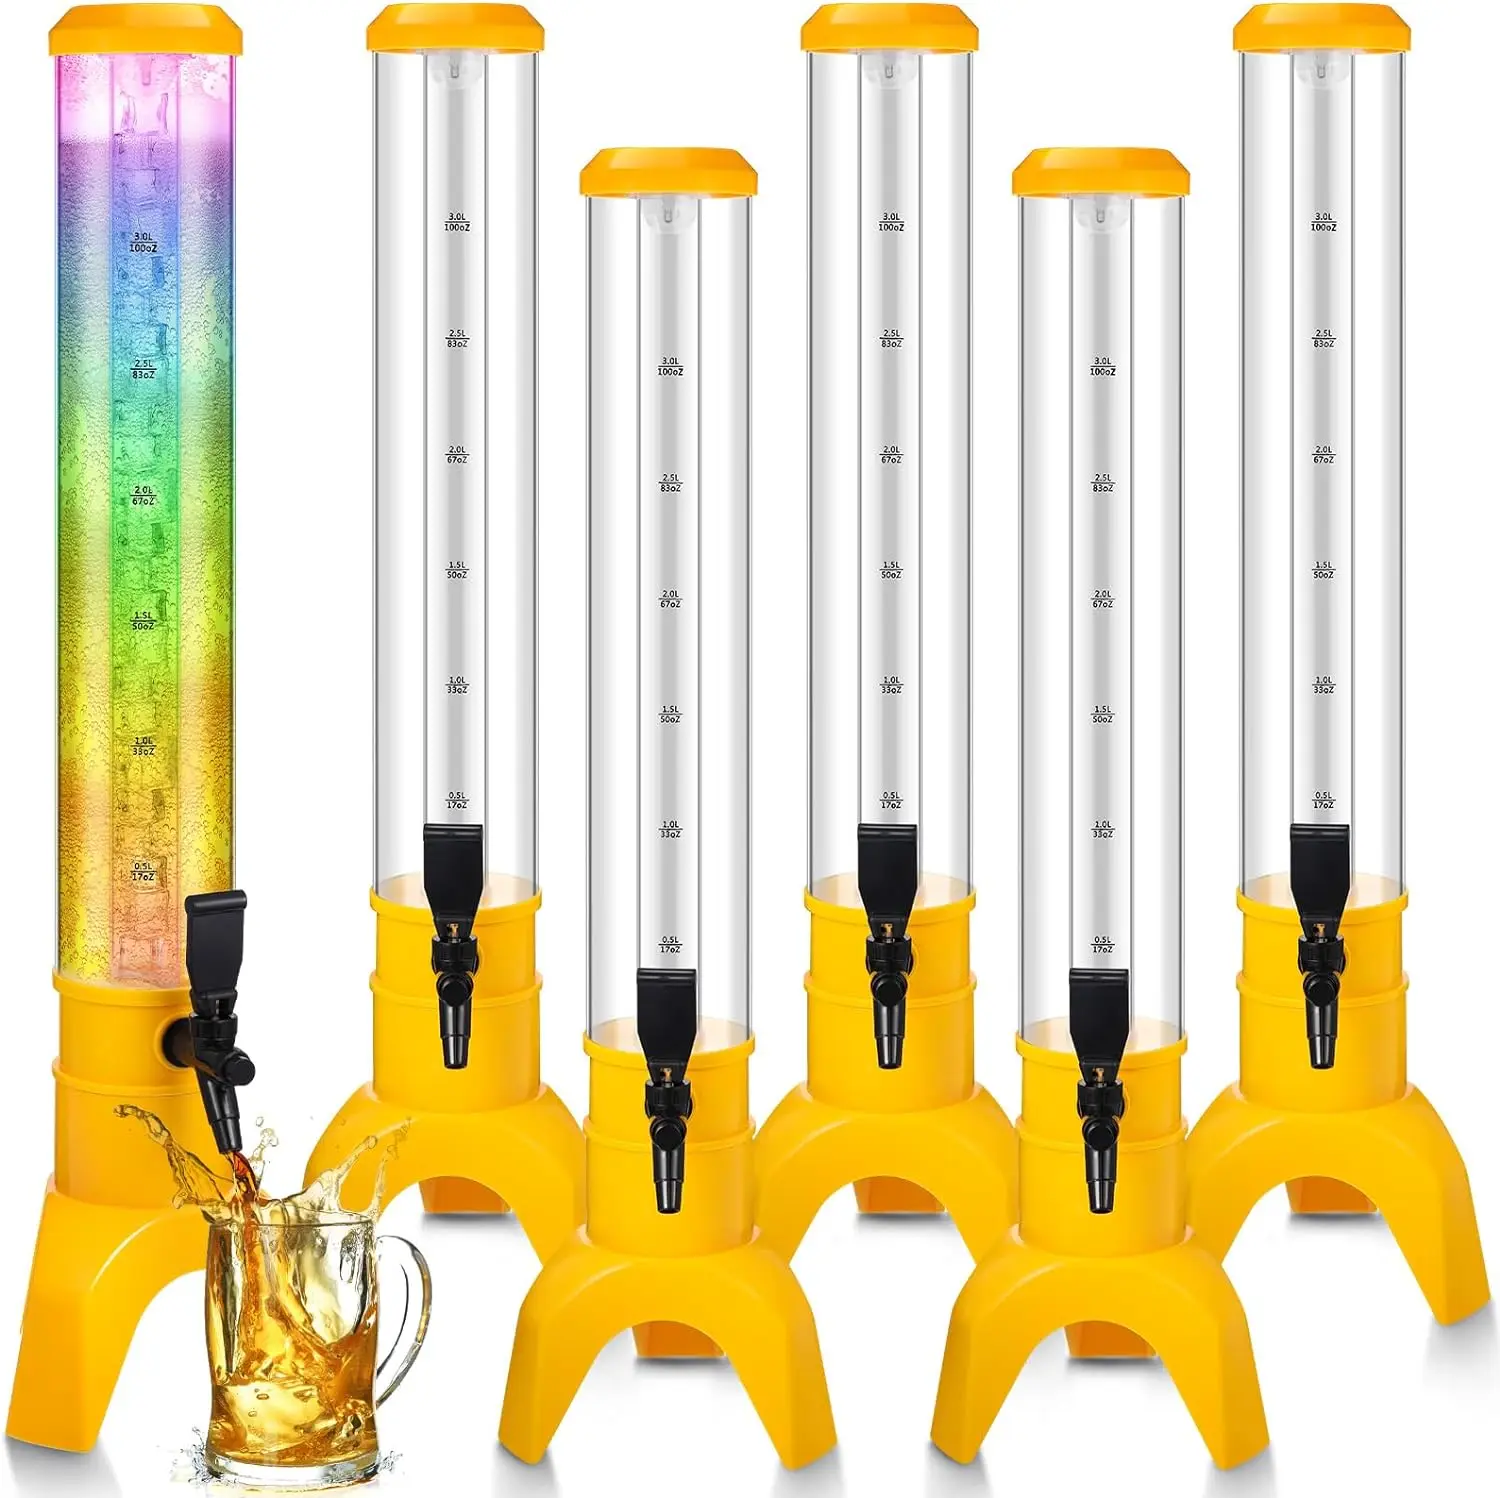 

6Pcs DrinkTower Dispenser for Drinks 3L/ 101 oz Mimosa Tower with Ice Tube&LED Light Beer Beverage Drink Dispenser for BarYellow